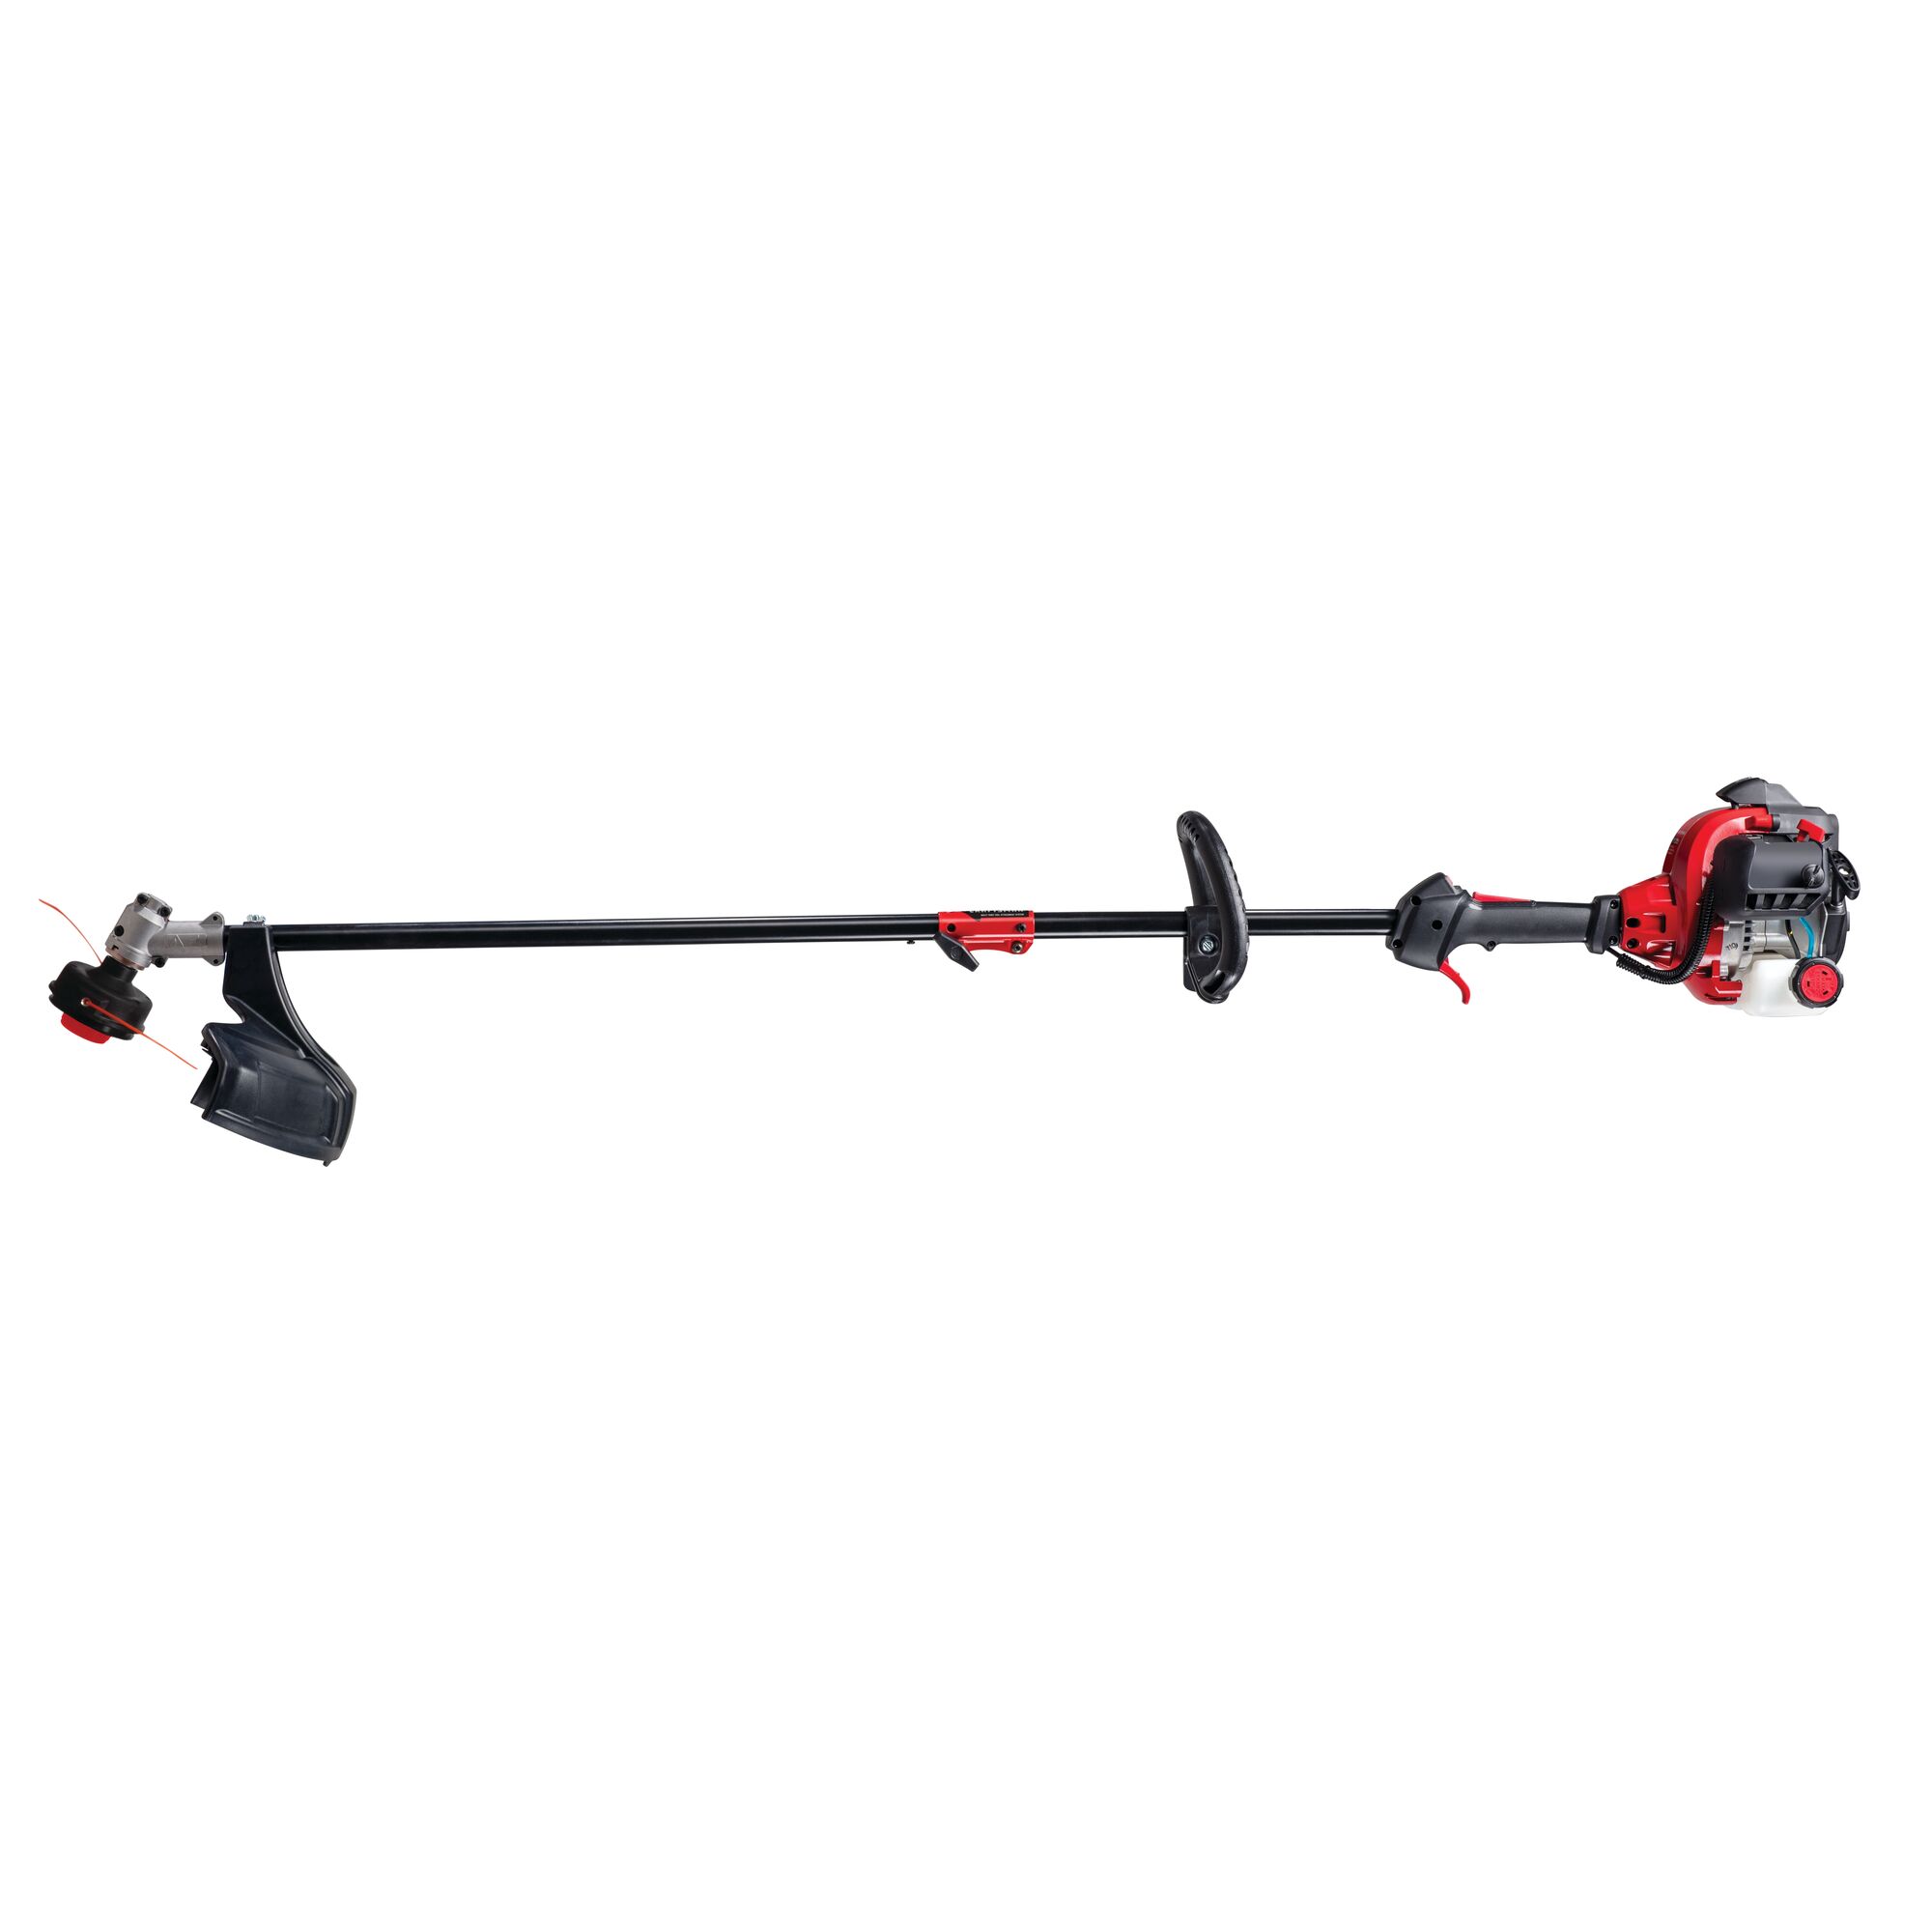 Profile of 17 inch 2 Cycle straight shaft gas weedwacker string trimmer with attachment capability.